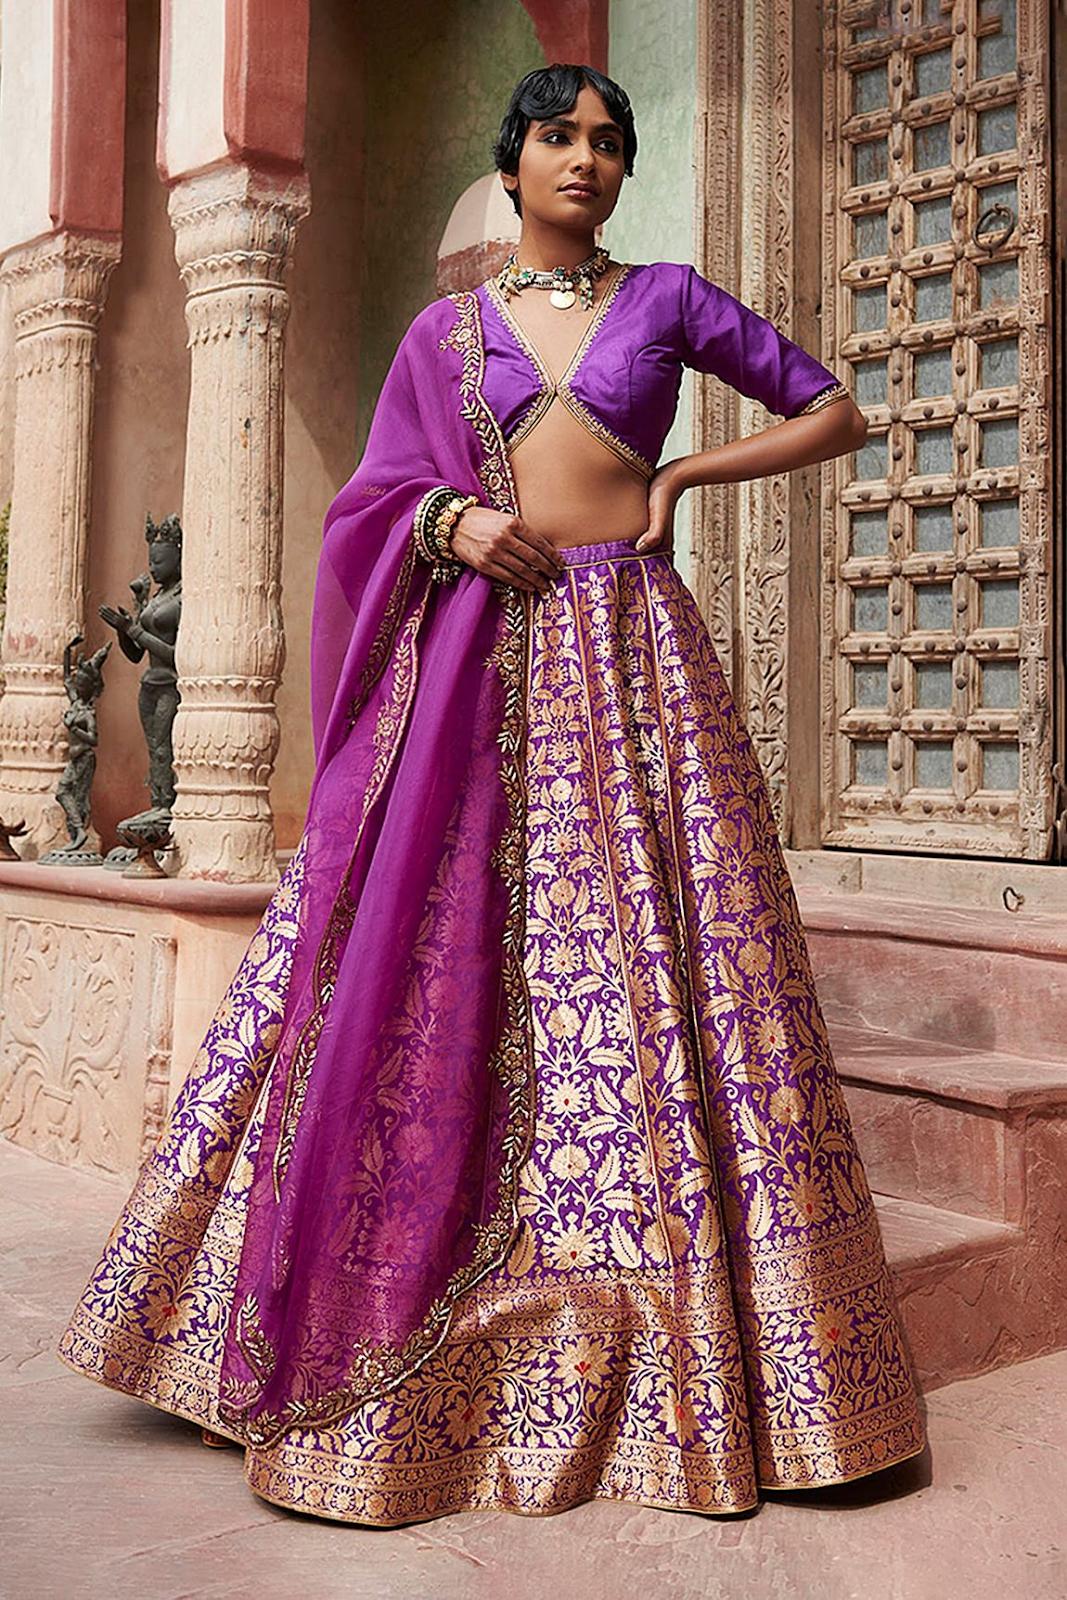 Moonlight Kalidaar | Indian wedding outfits, Wedding dresses for girls, Indian  gowns dresses